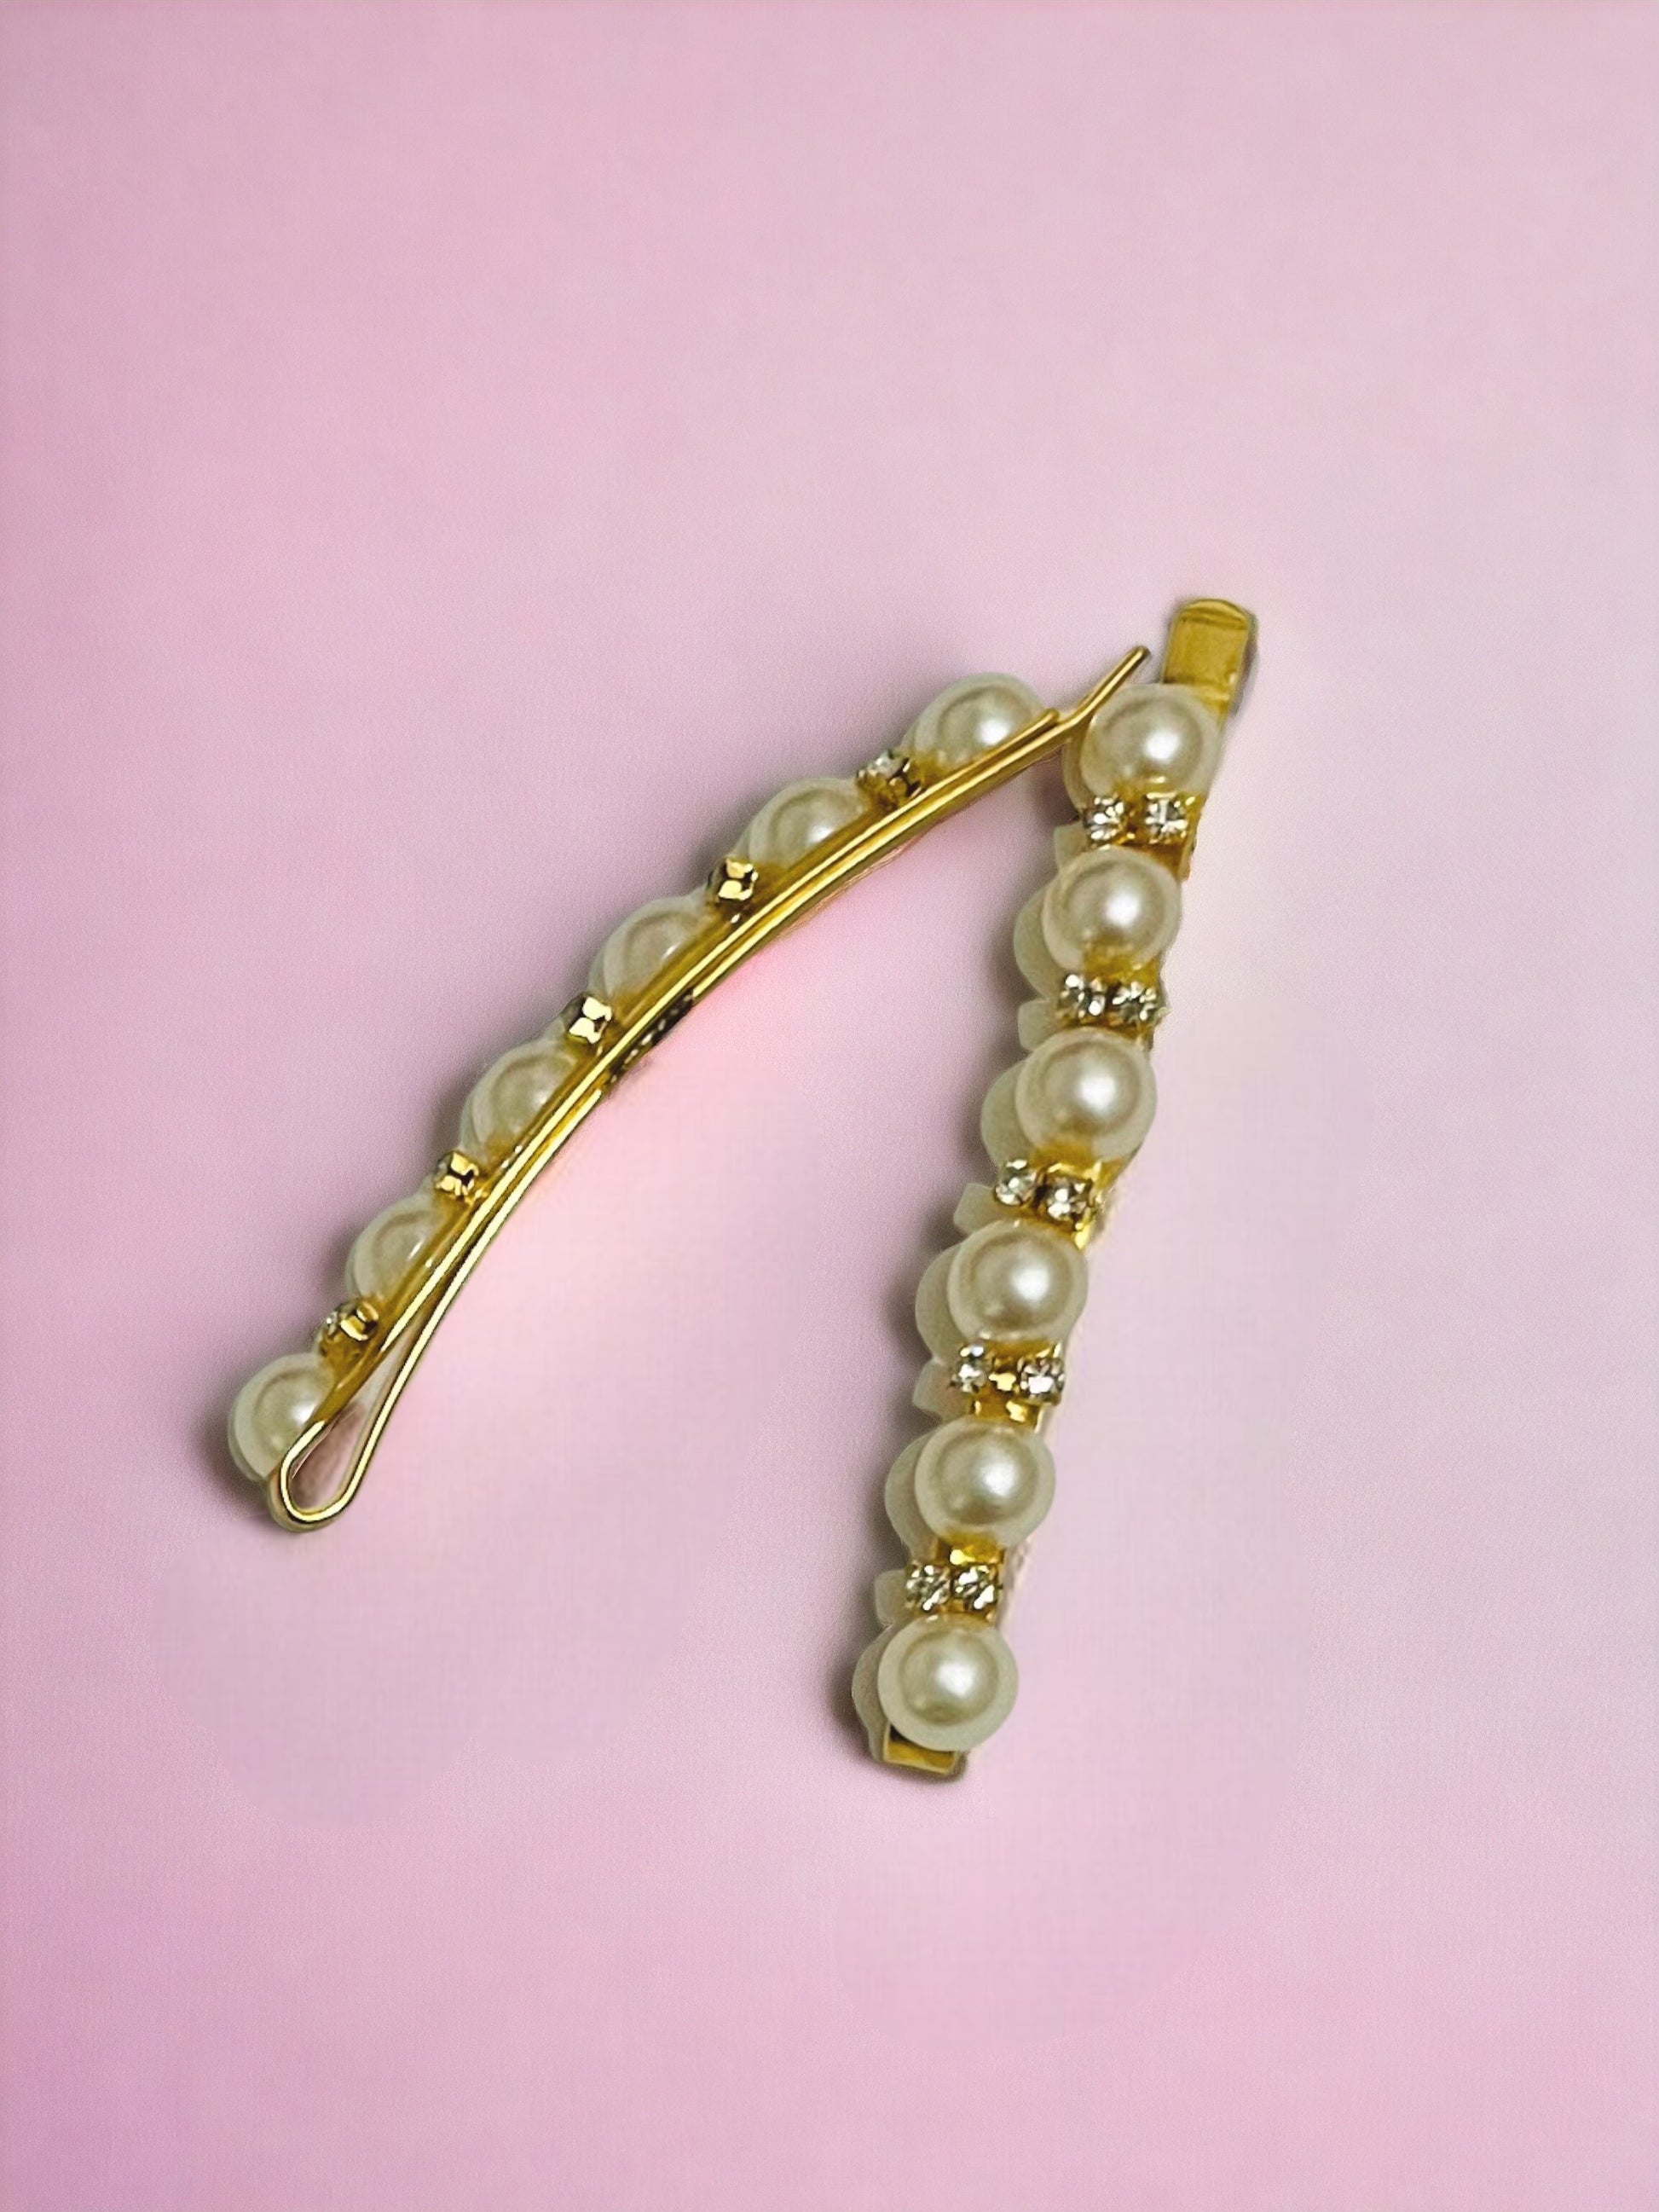 Golden Hair Pin Set with Beads & Pearls